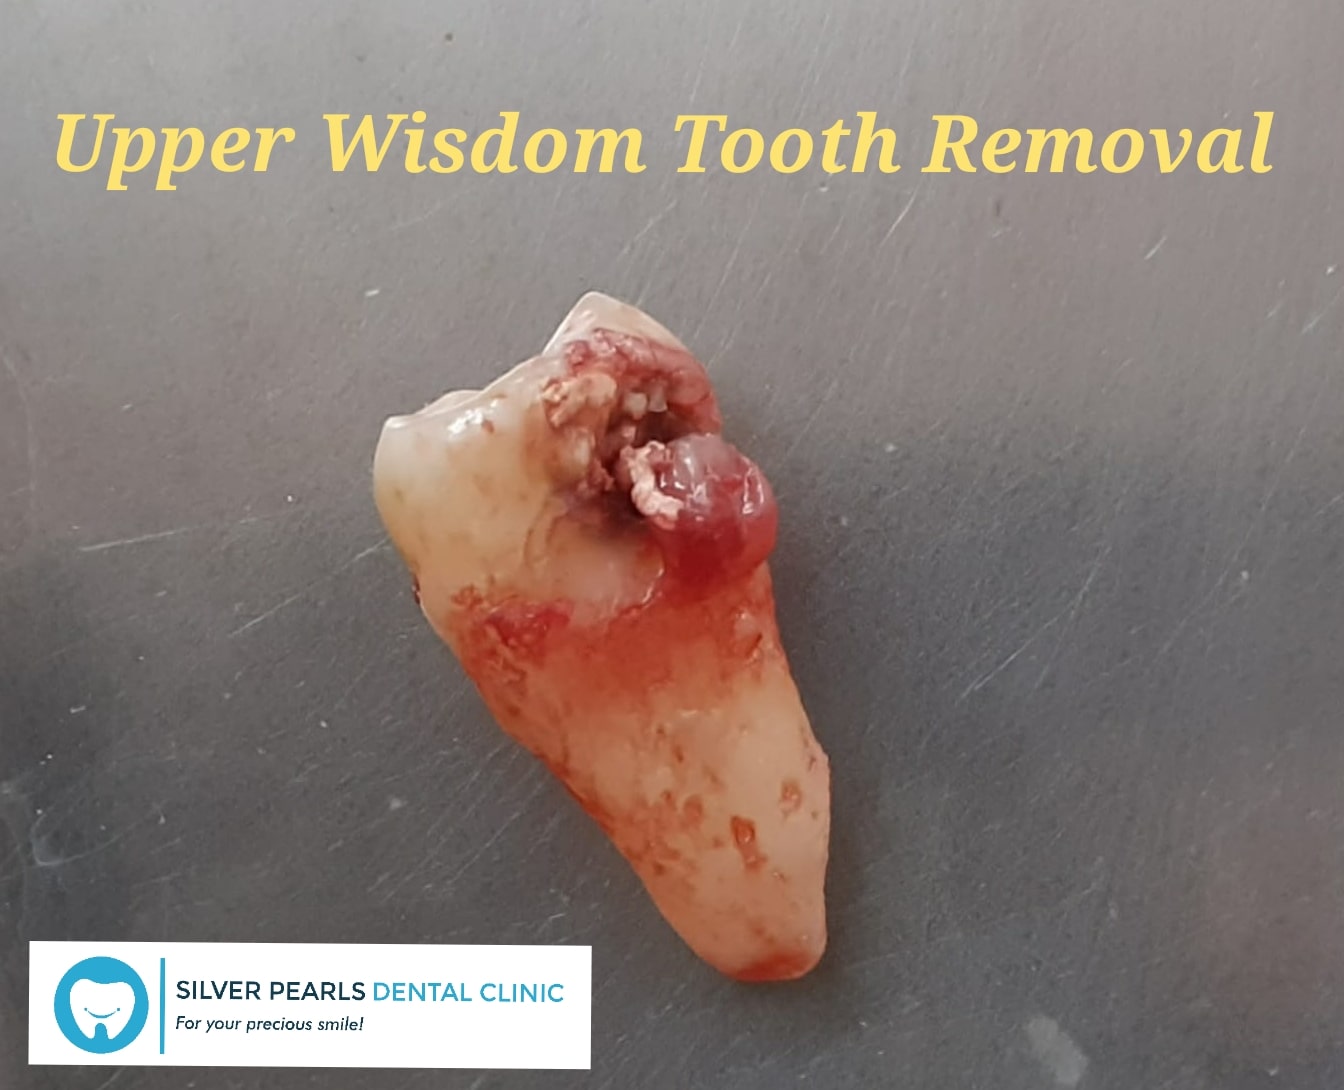 Wisdom tooth can cause cavities or caries and hence the food lodgment, infection, gum disease, swelling on face, pain upon chewing and difficulty in opening the mouth. If you are having any of the symptoms, please visit your dentist earliest.